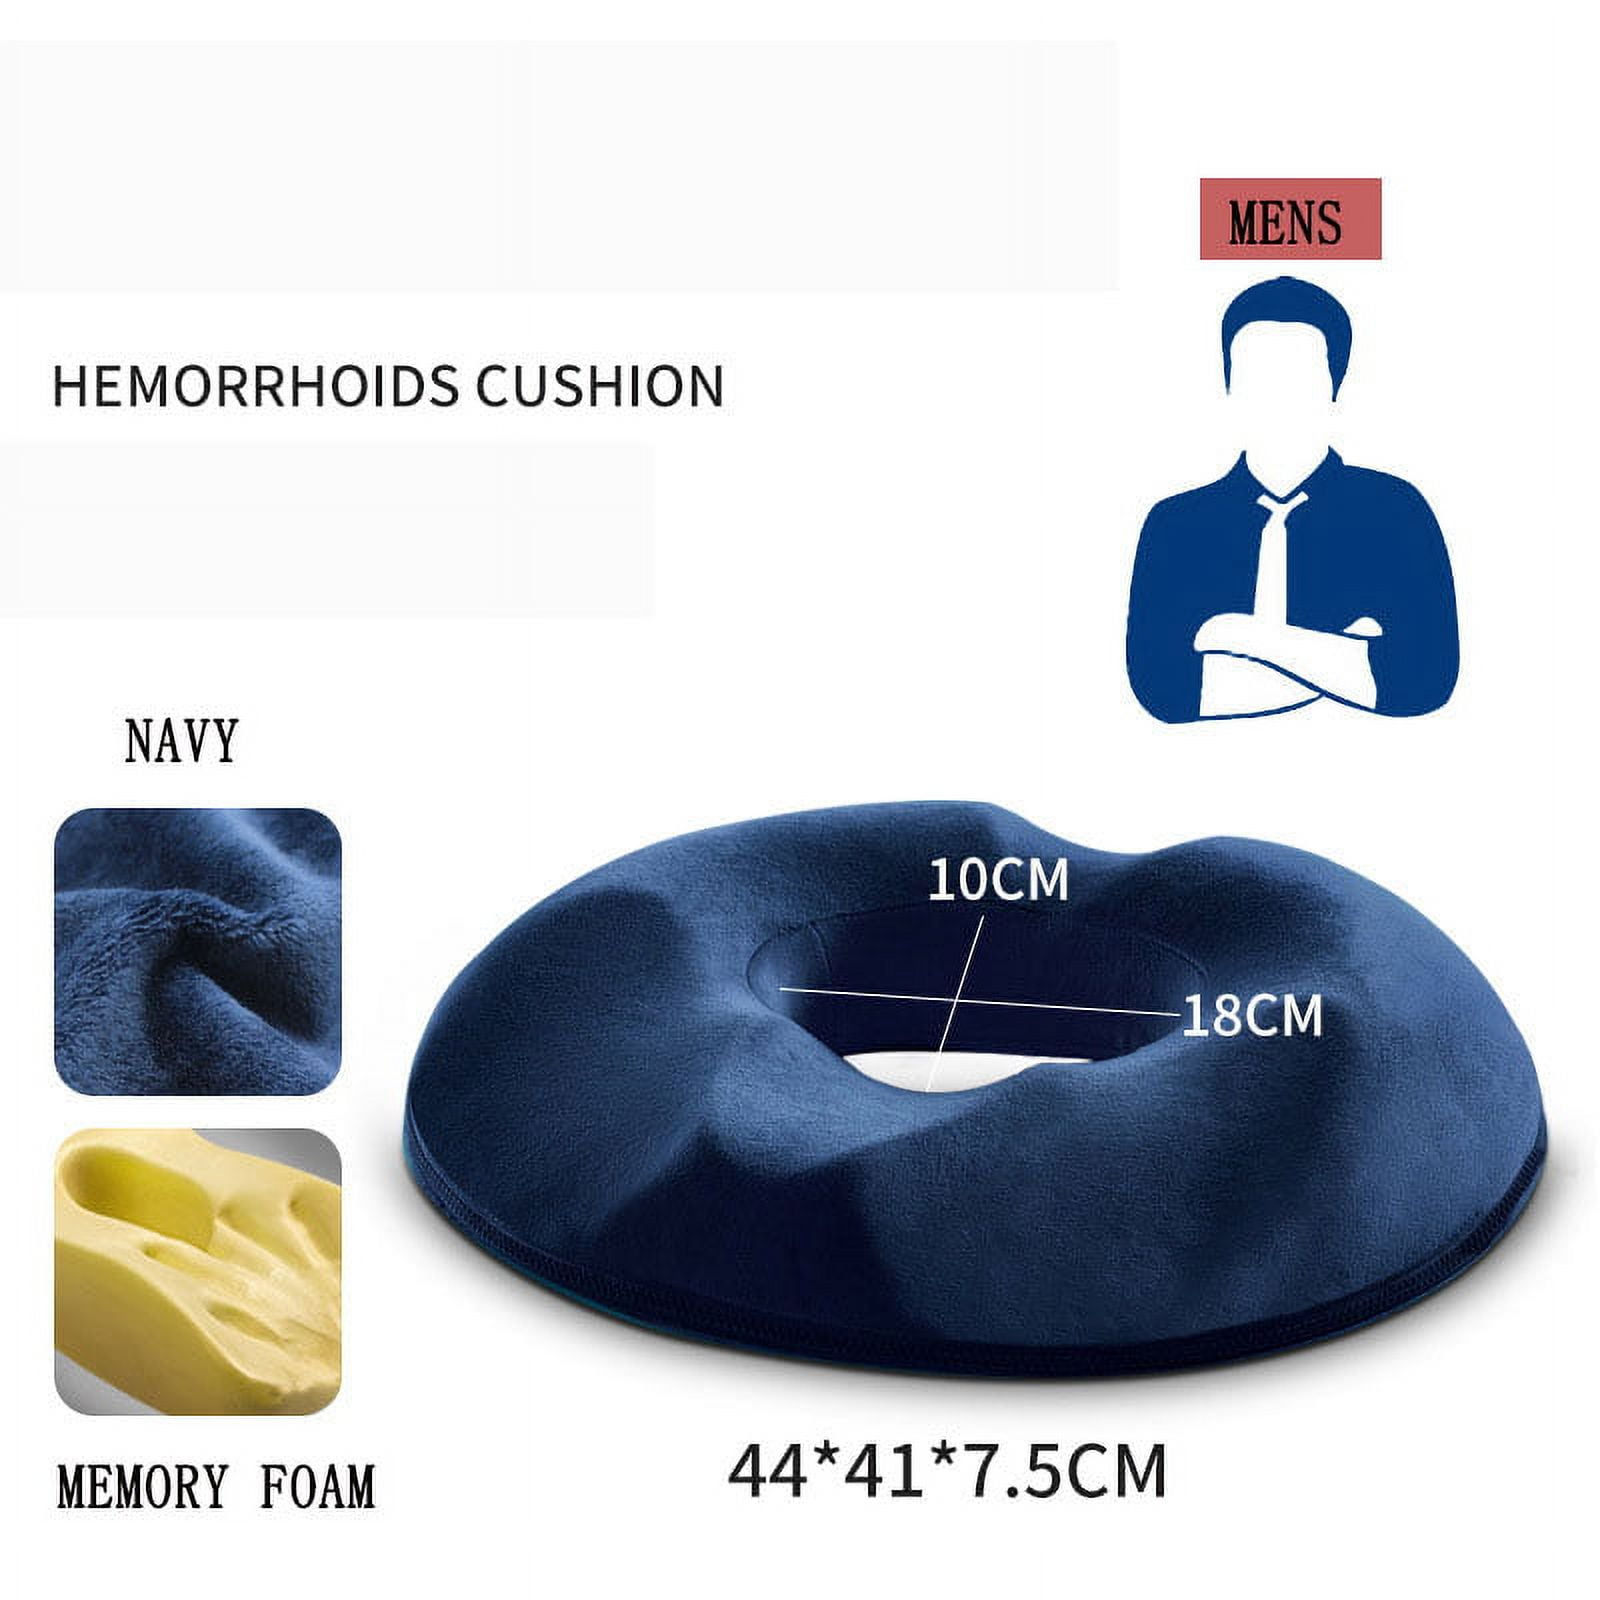 Memory Foam Seat Cushion Pillow for Home Car Office Chair for Hemorrhoids  Prostate Pregnancy Pressure Sores Post Surgery 